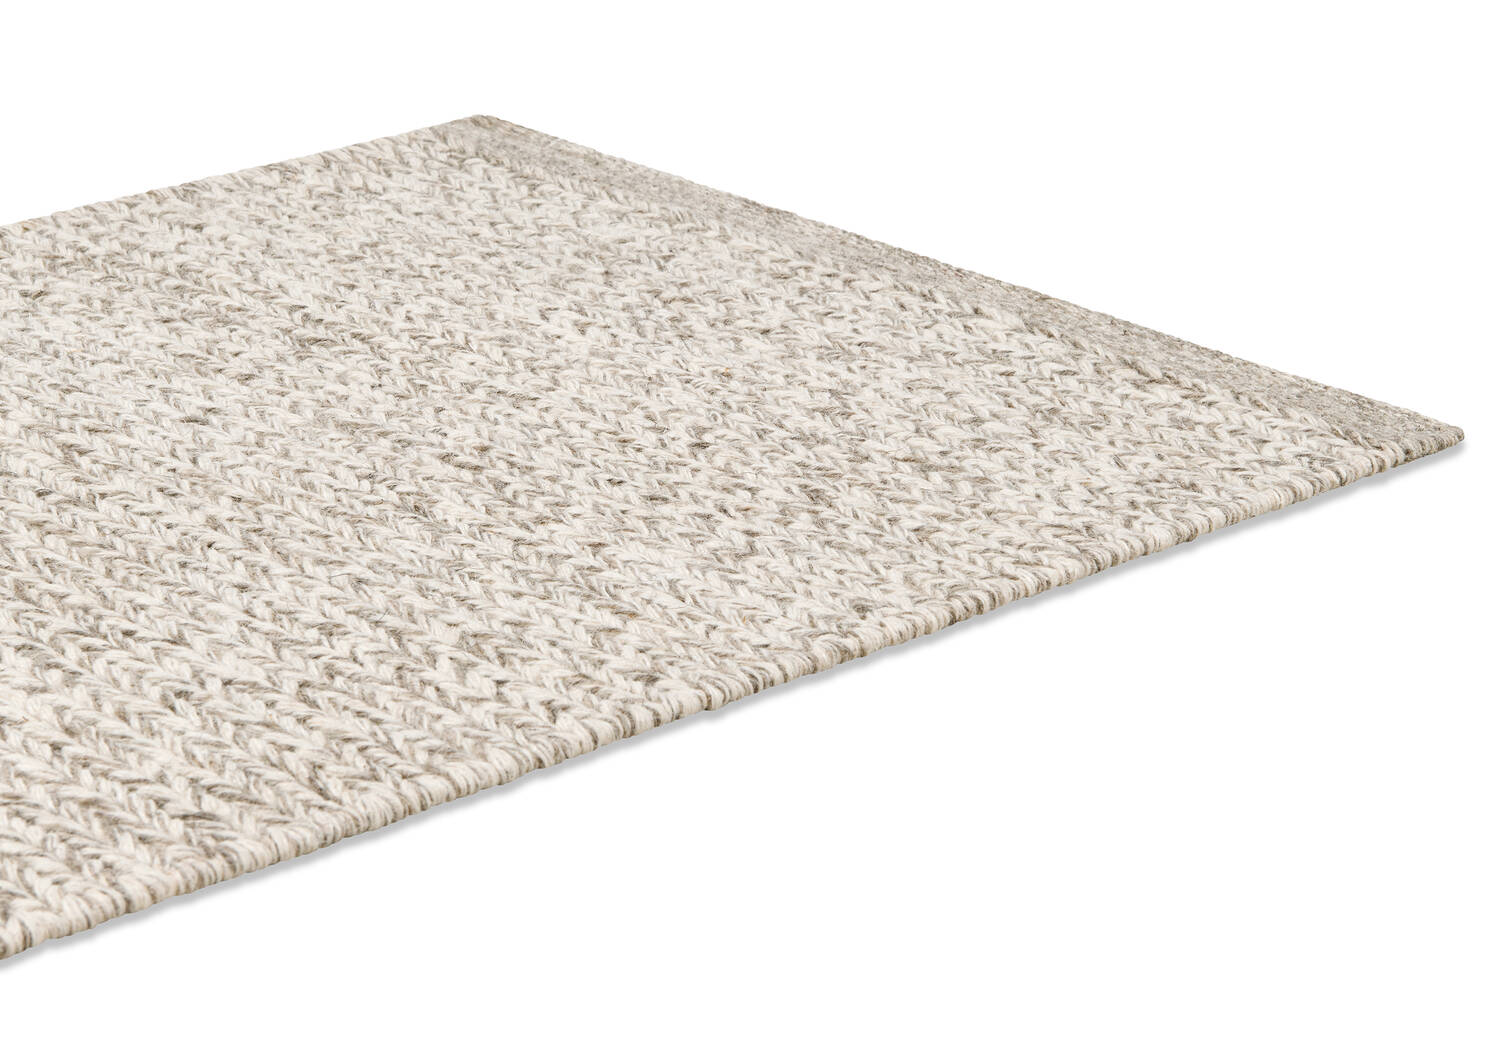 Cosette Accent Rug 24x36 Ivory/Natural